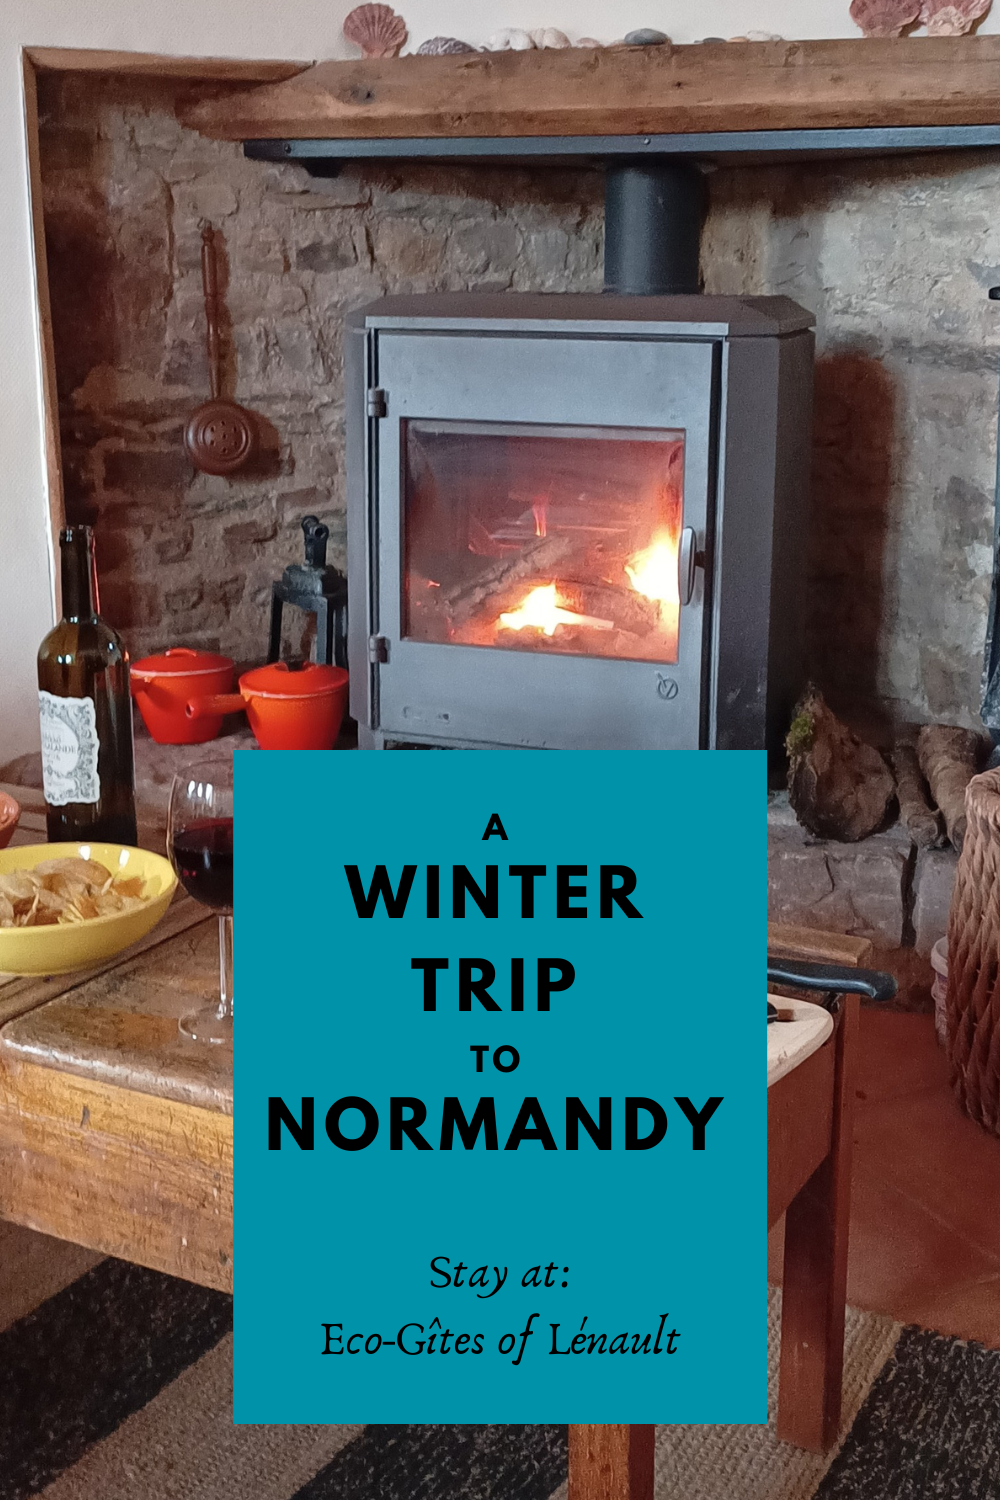 Plan your winter trip to Normandy and stay at Eco-Gites of Lenault